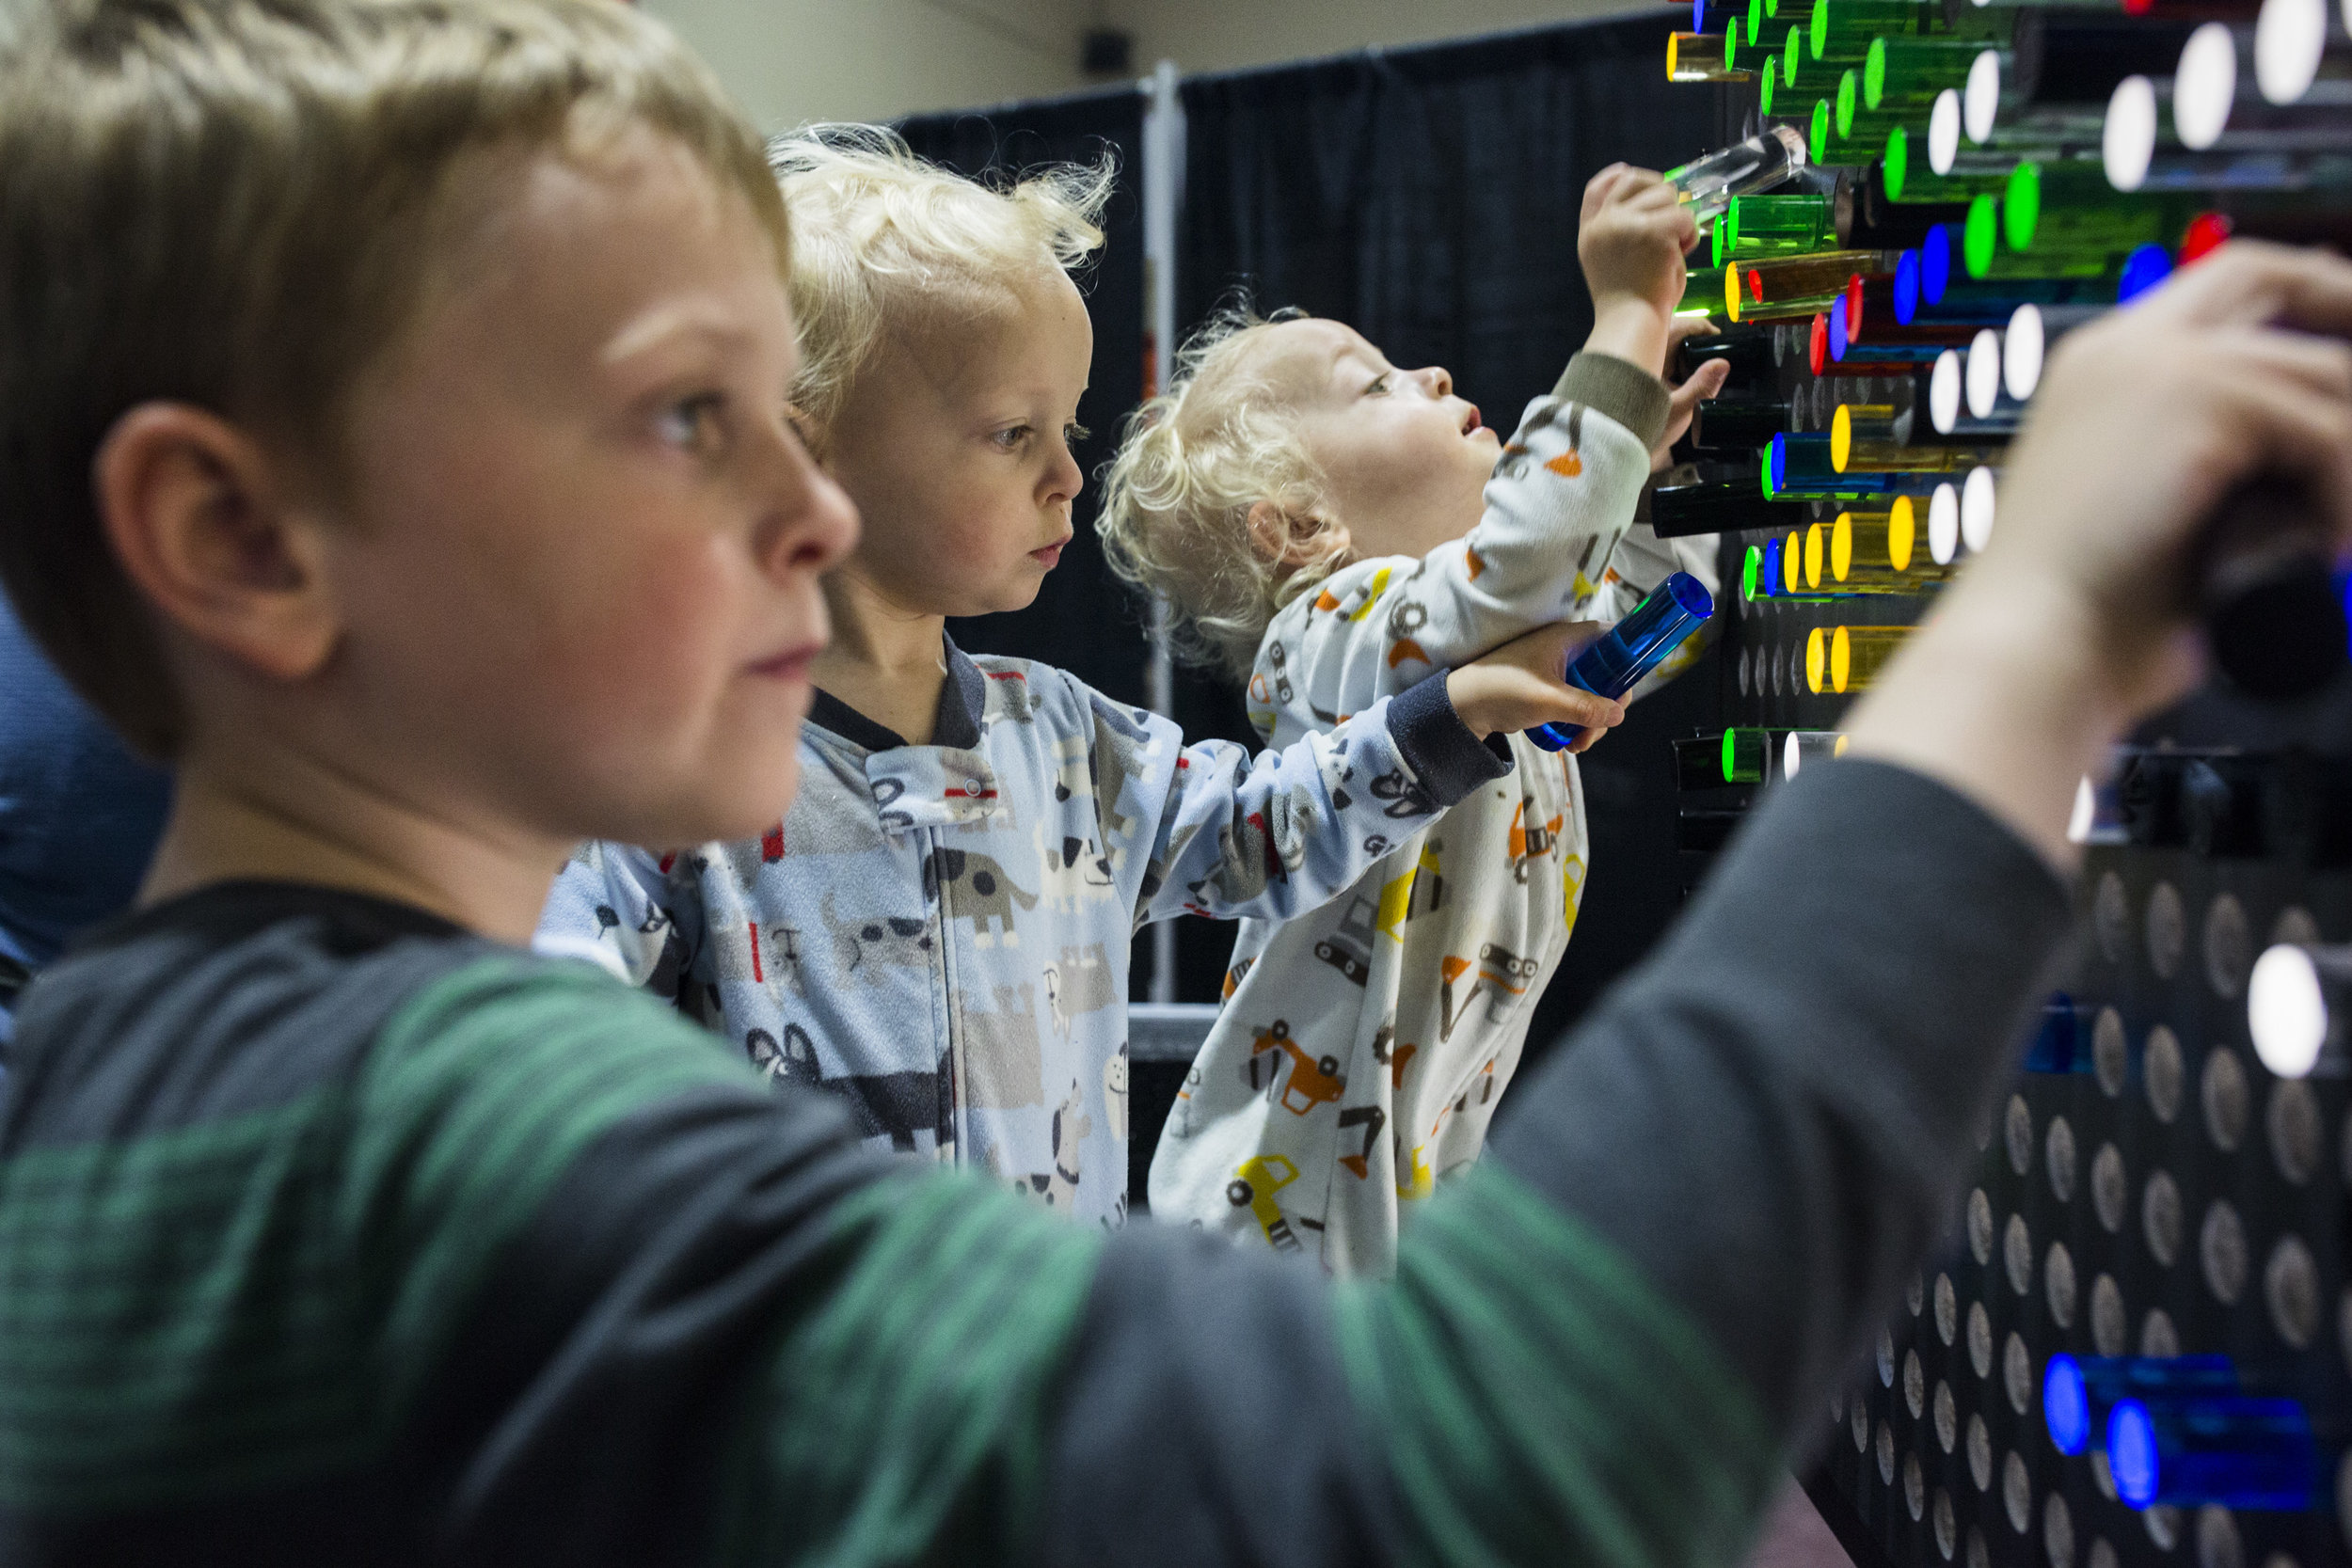  Jacob, 6, Garrett, 2, and Cameron Boland, 2, play at the Giant Light Bright at Rochester Institute of Technology during Imagine RIT on May 6, 2017. The Imagine RIT: Innovation and Creativity Festival is an annual event that showcases the achievement